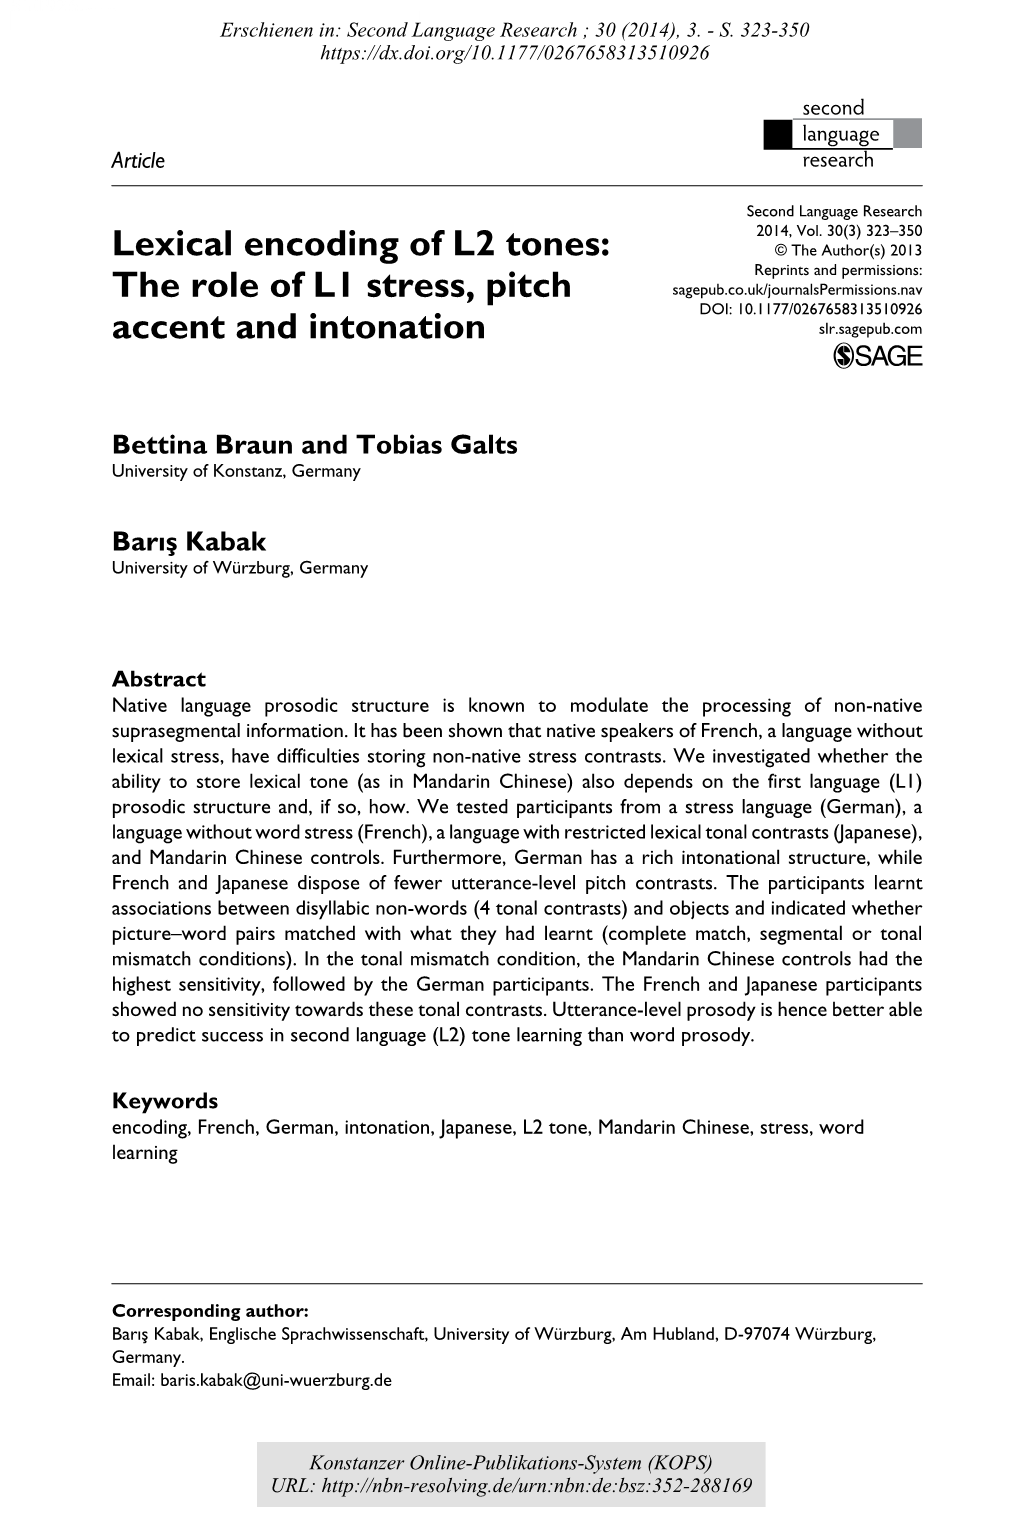 Lexical Encoding of L2 Tones : the Role of L1 Stress, Pitch Accent And